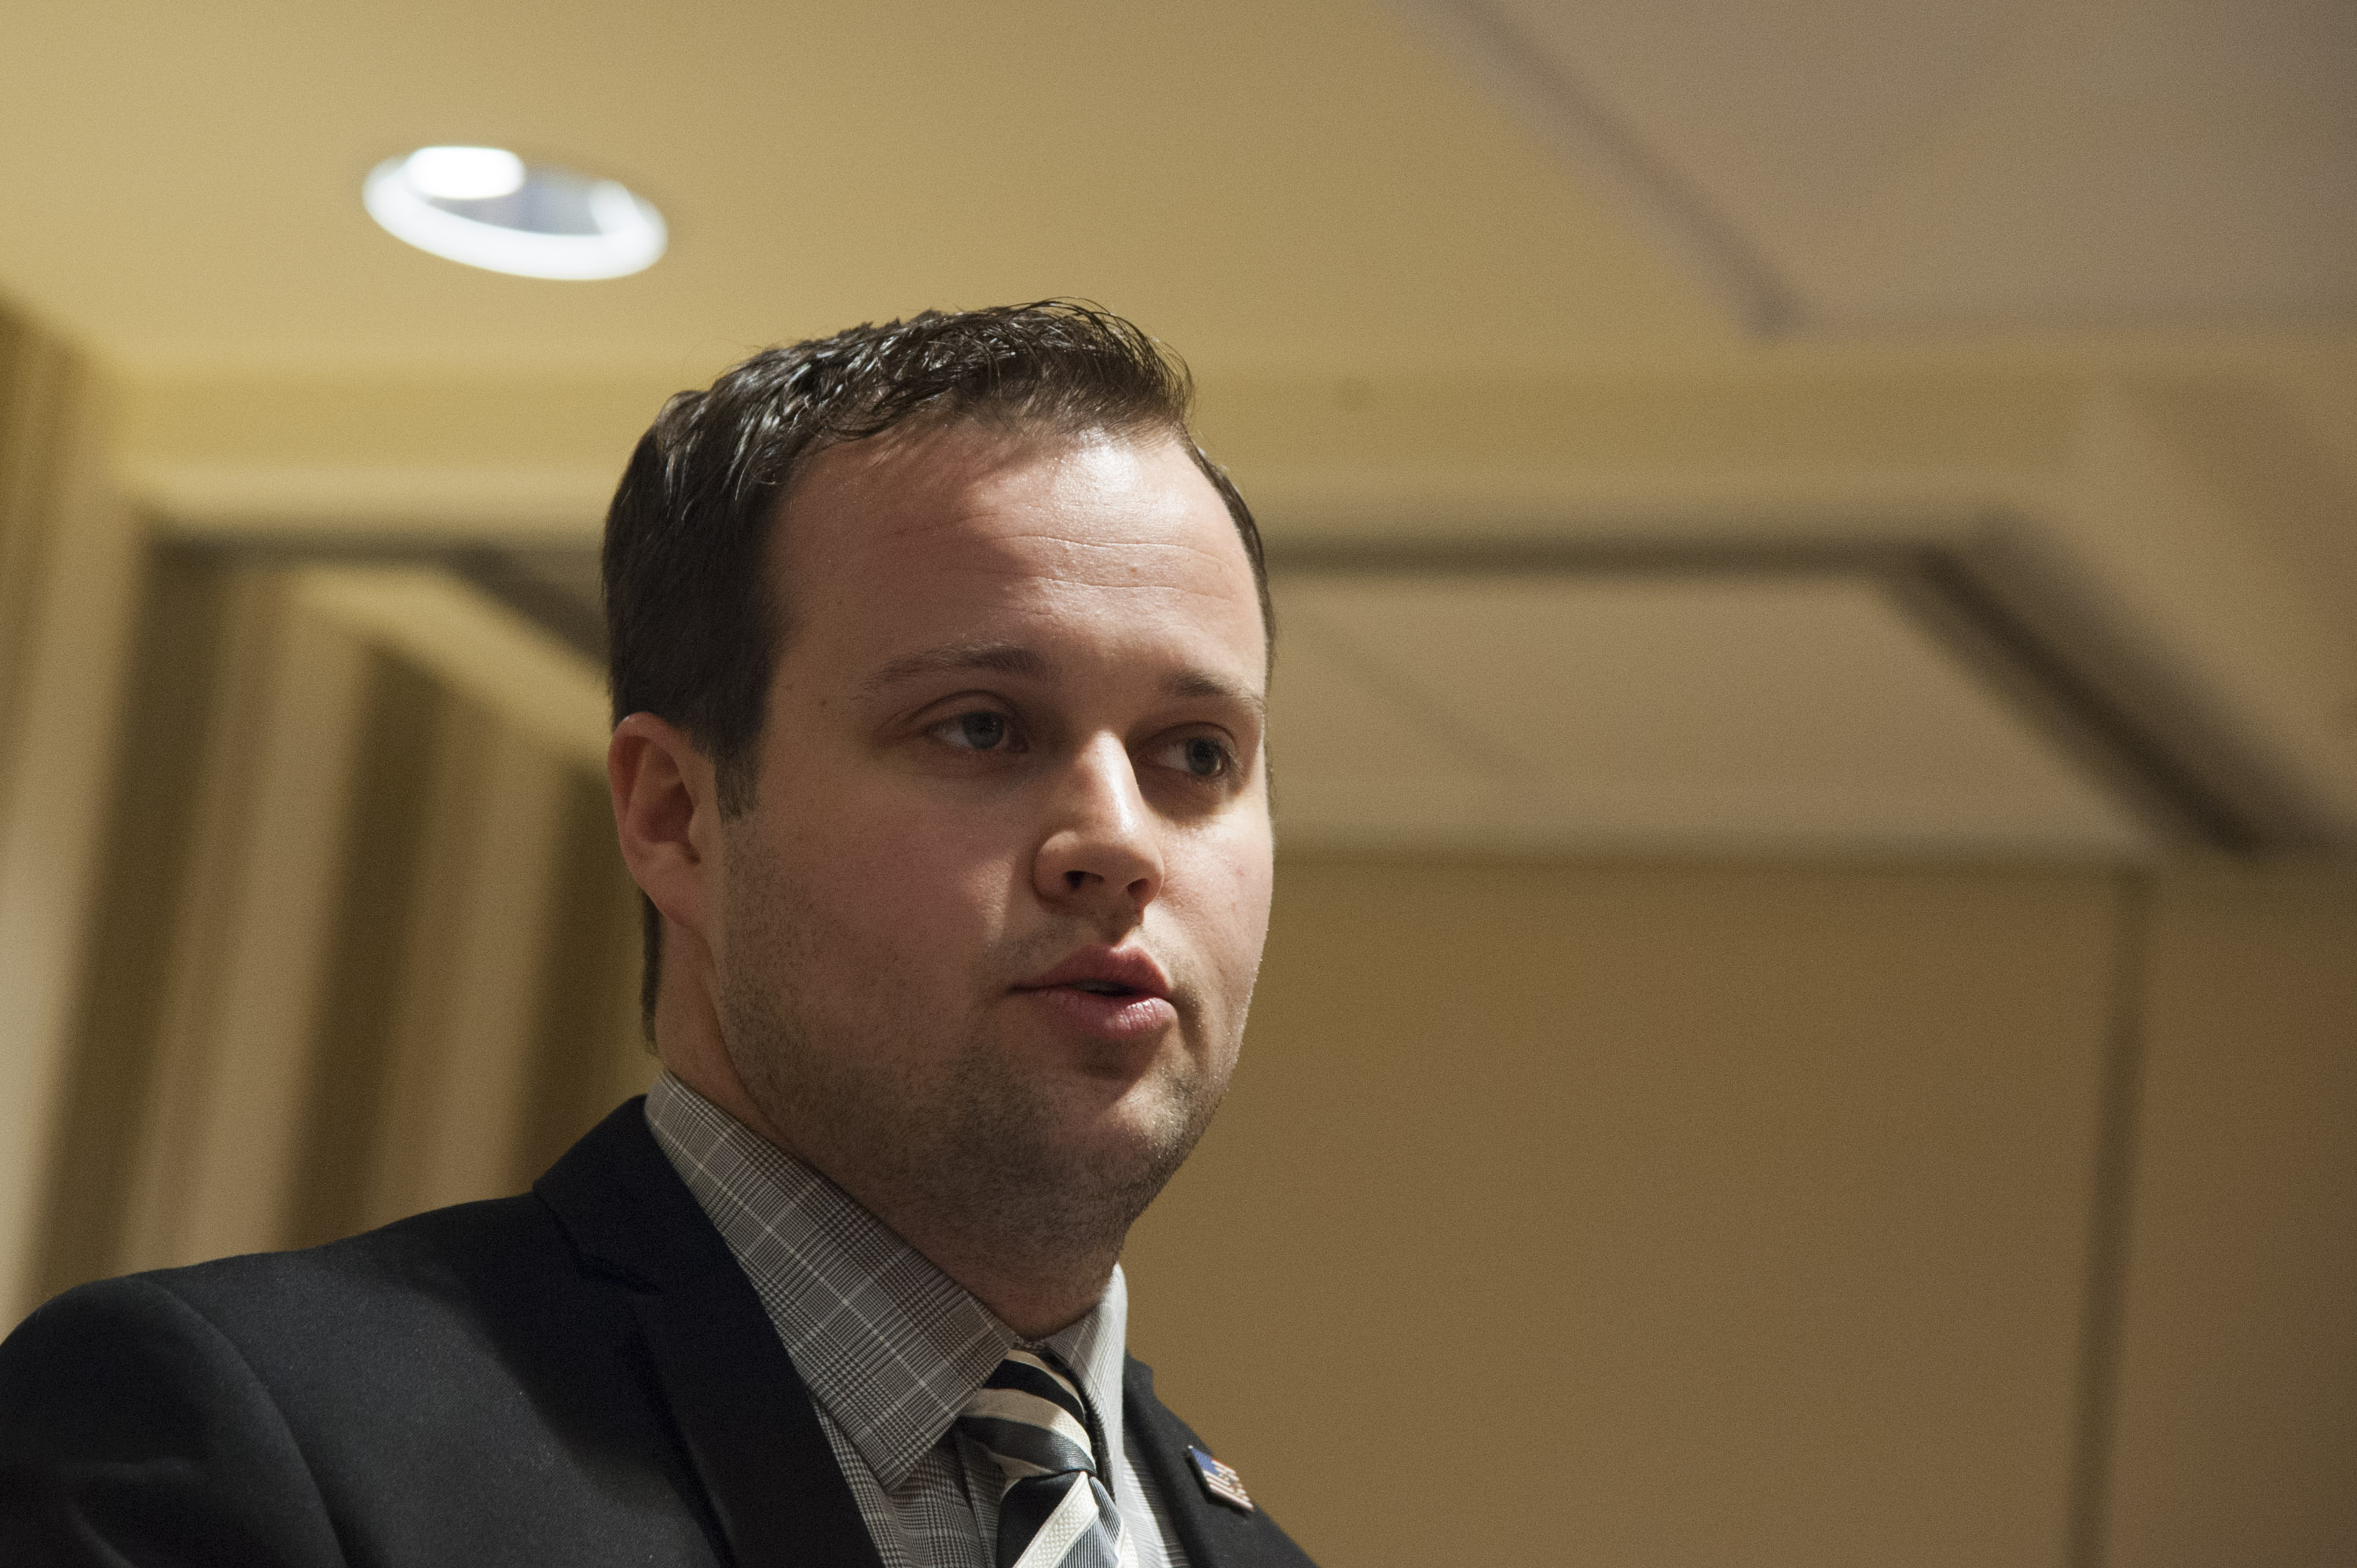 Josh Duggar on Feb. 28, 2015 in National Harbor, Md. (Kris Connor—Getty Images)